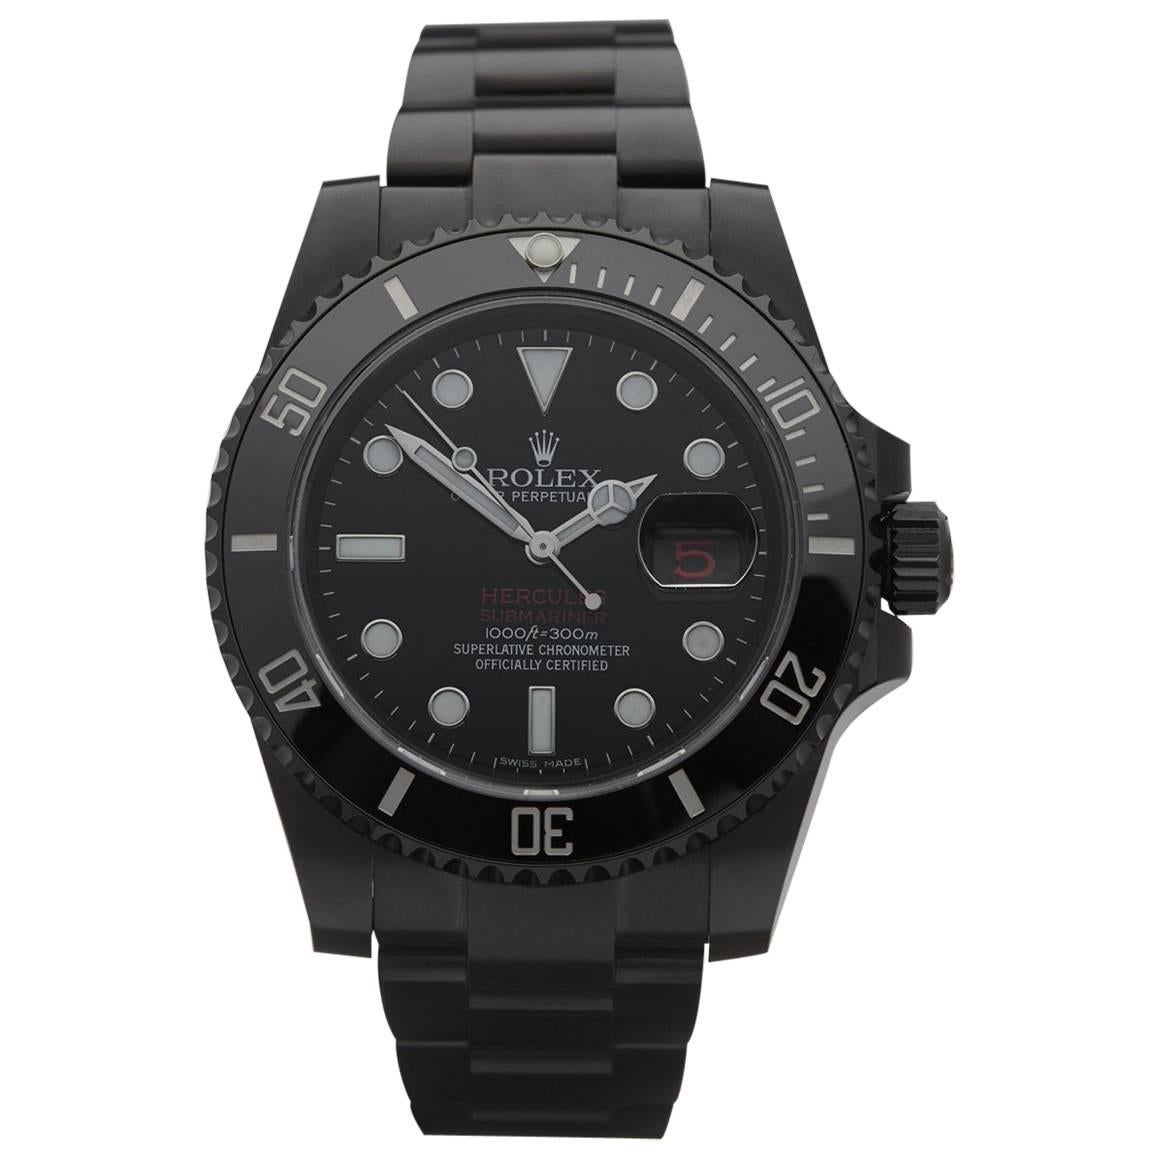  Rolex Stainless Steel Submariner Hercules Custom DLC Coated Automatic Watch 